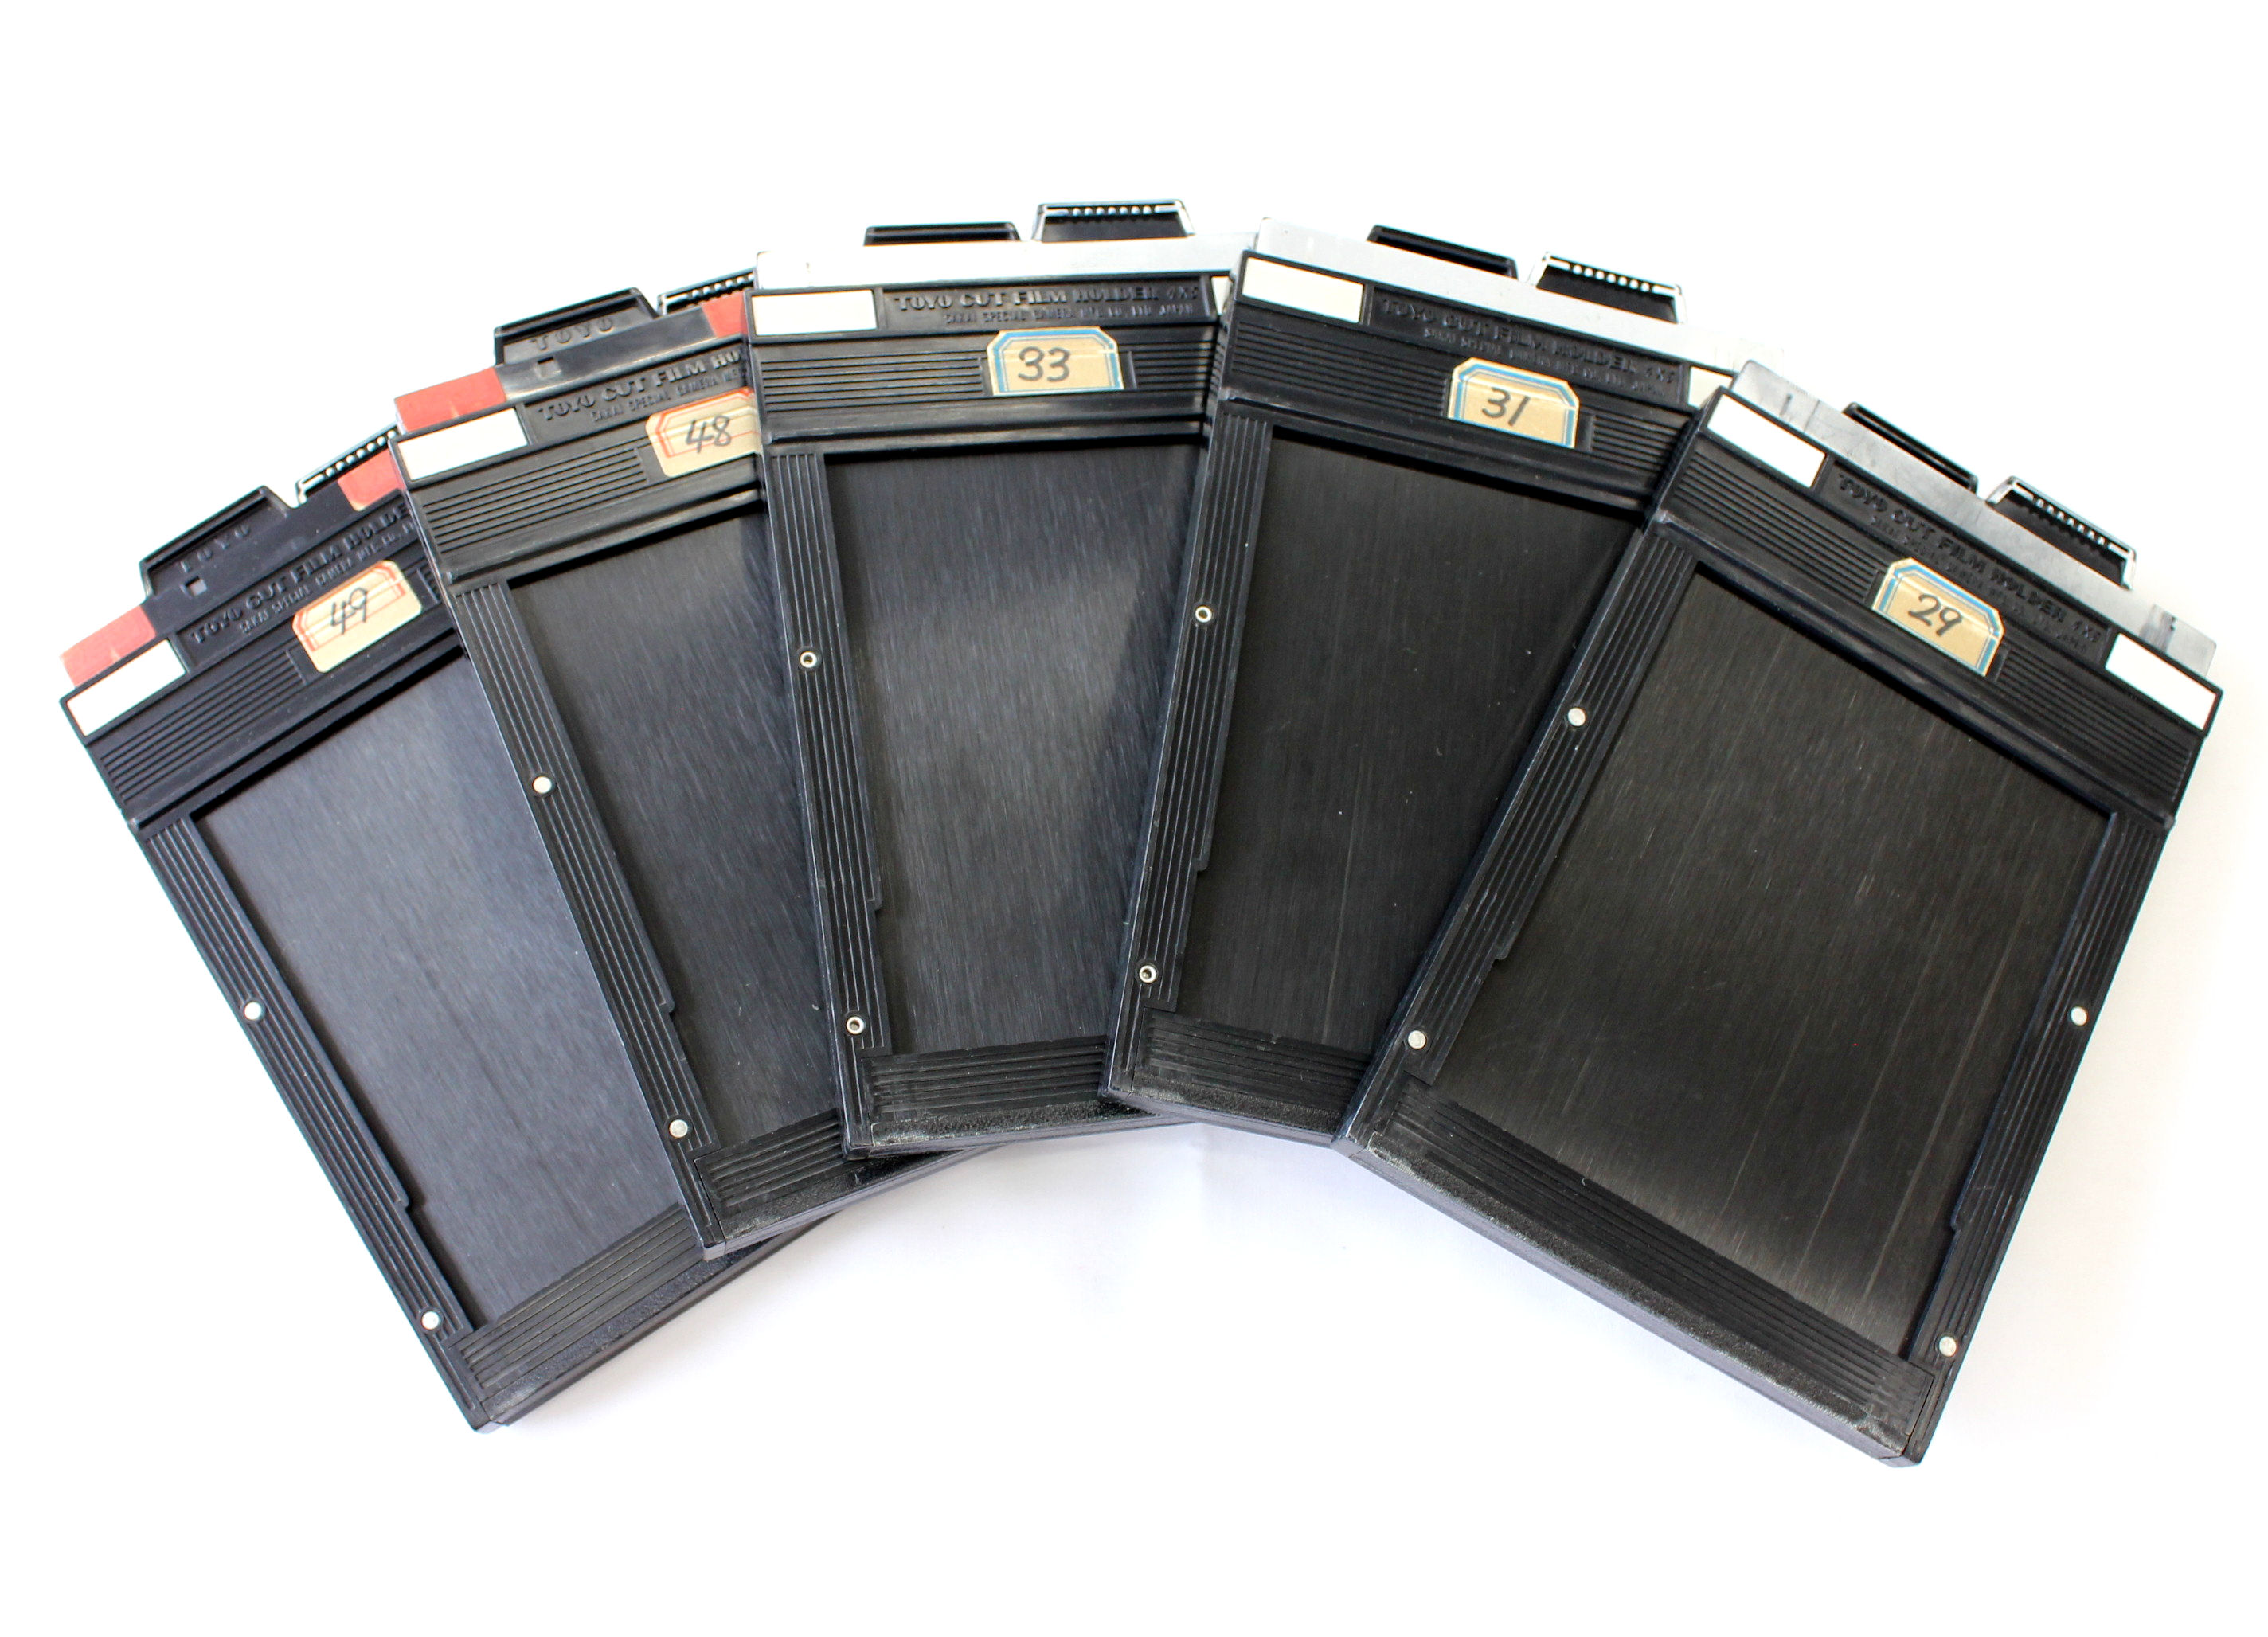 Toyo 4x5 Cut Film Holder Lot of 5 from Japan